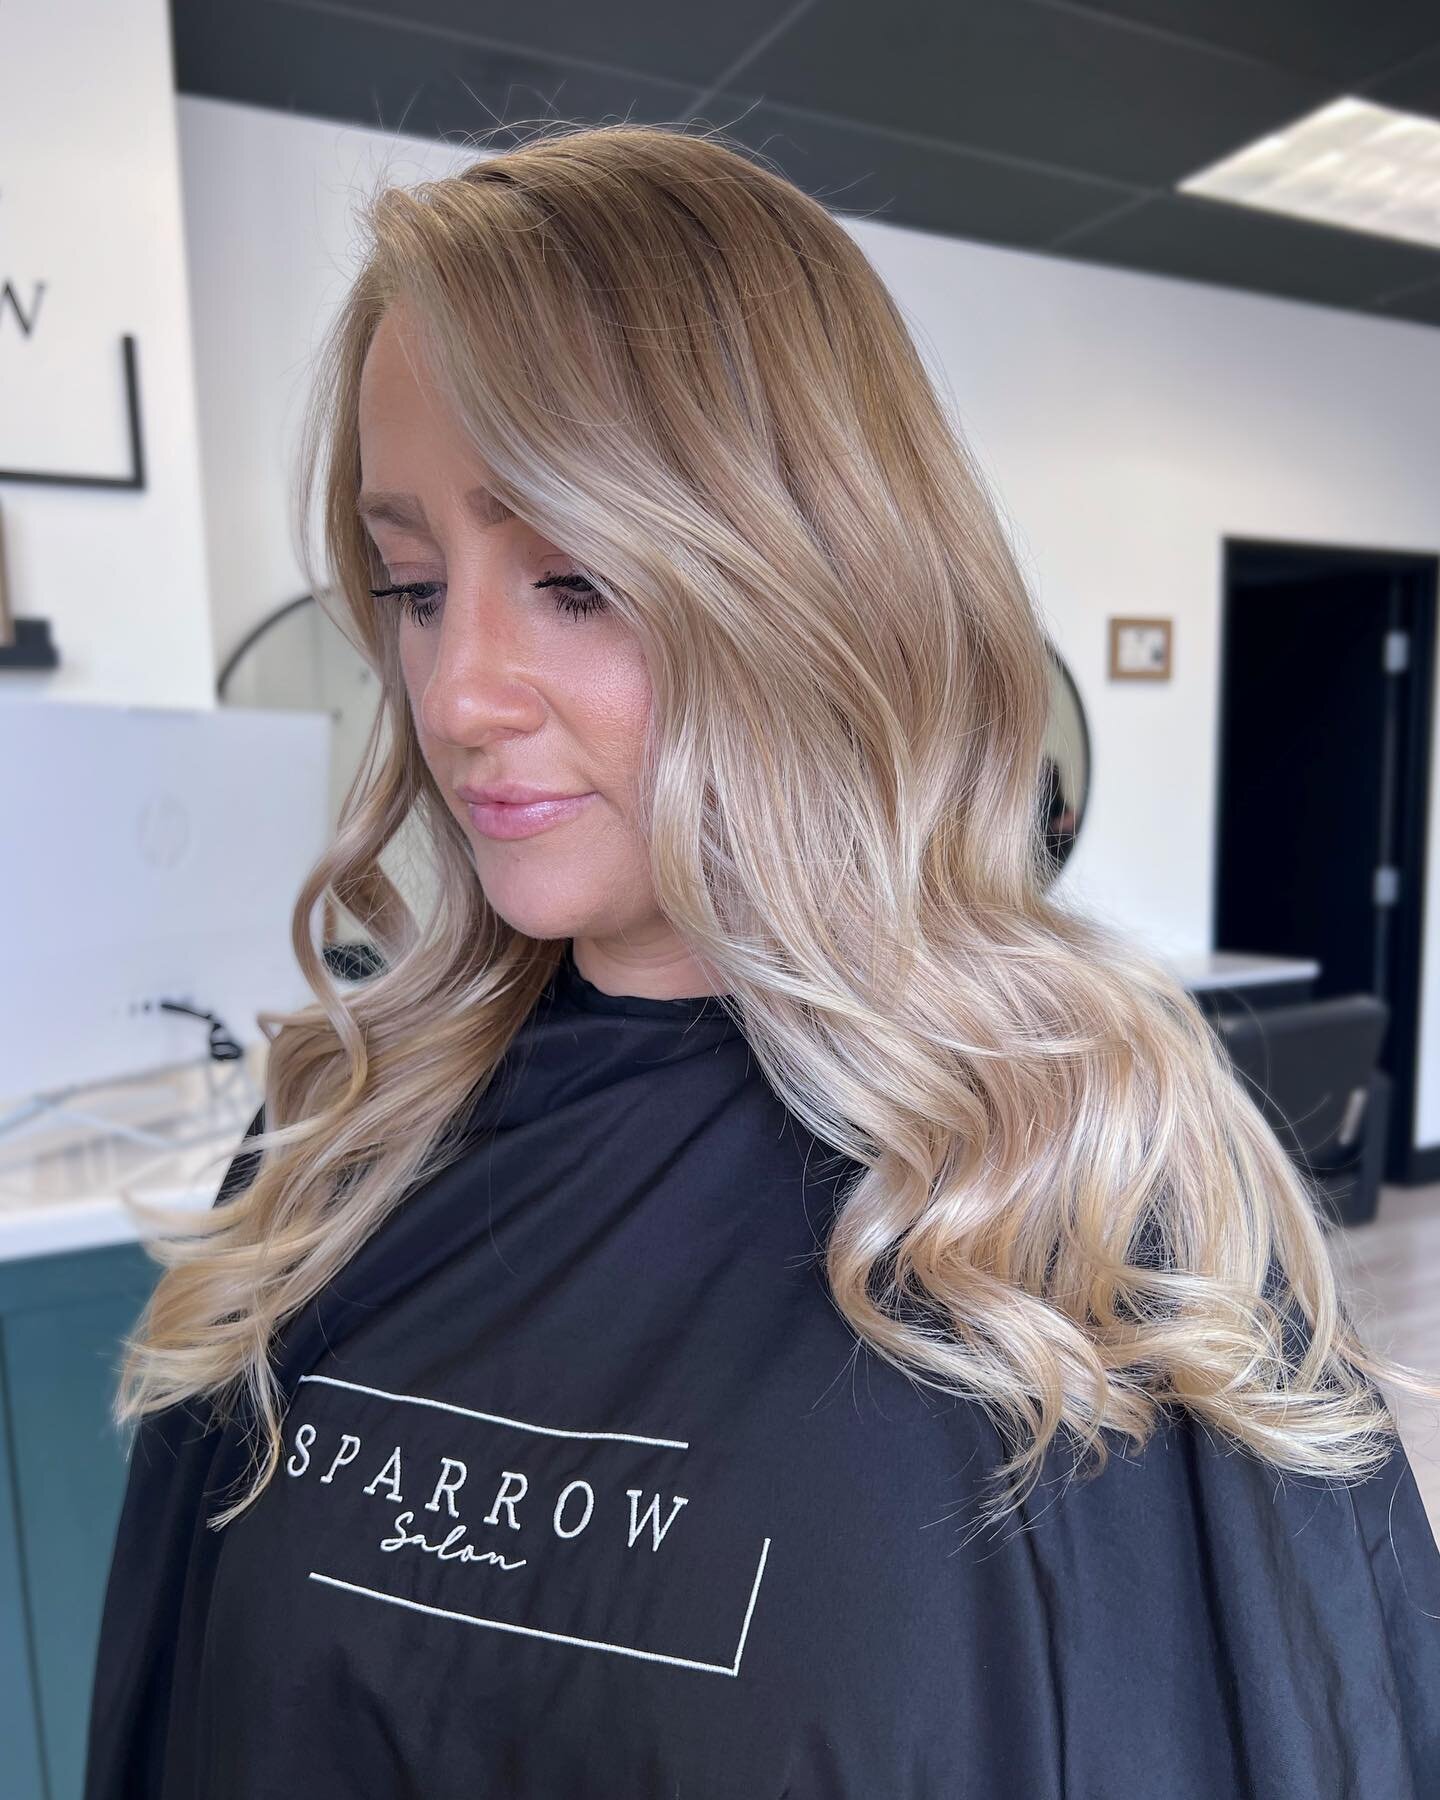 Why do we tease when we do balayage or foilyage? 

Gentle teasing creates a softer, seamless transition and avoids any splotchy spots of hard lines. 

It helps achieve that effortless lived in look we all love! 

Knowing why, is huge! 

It's never a 